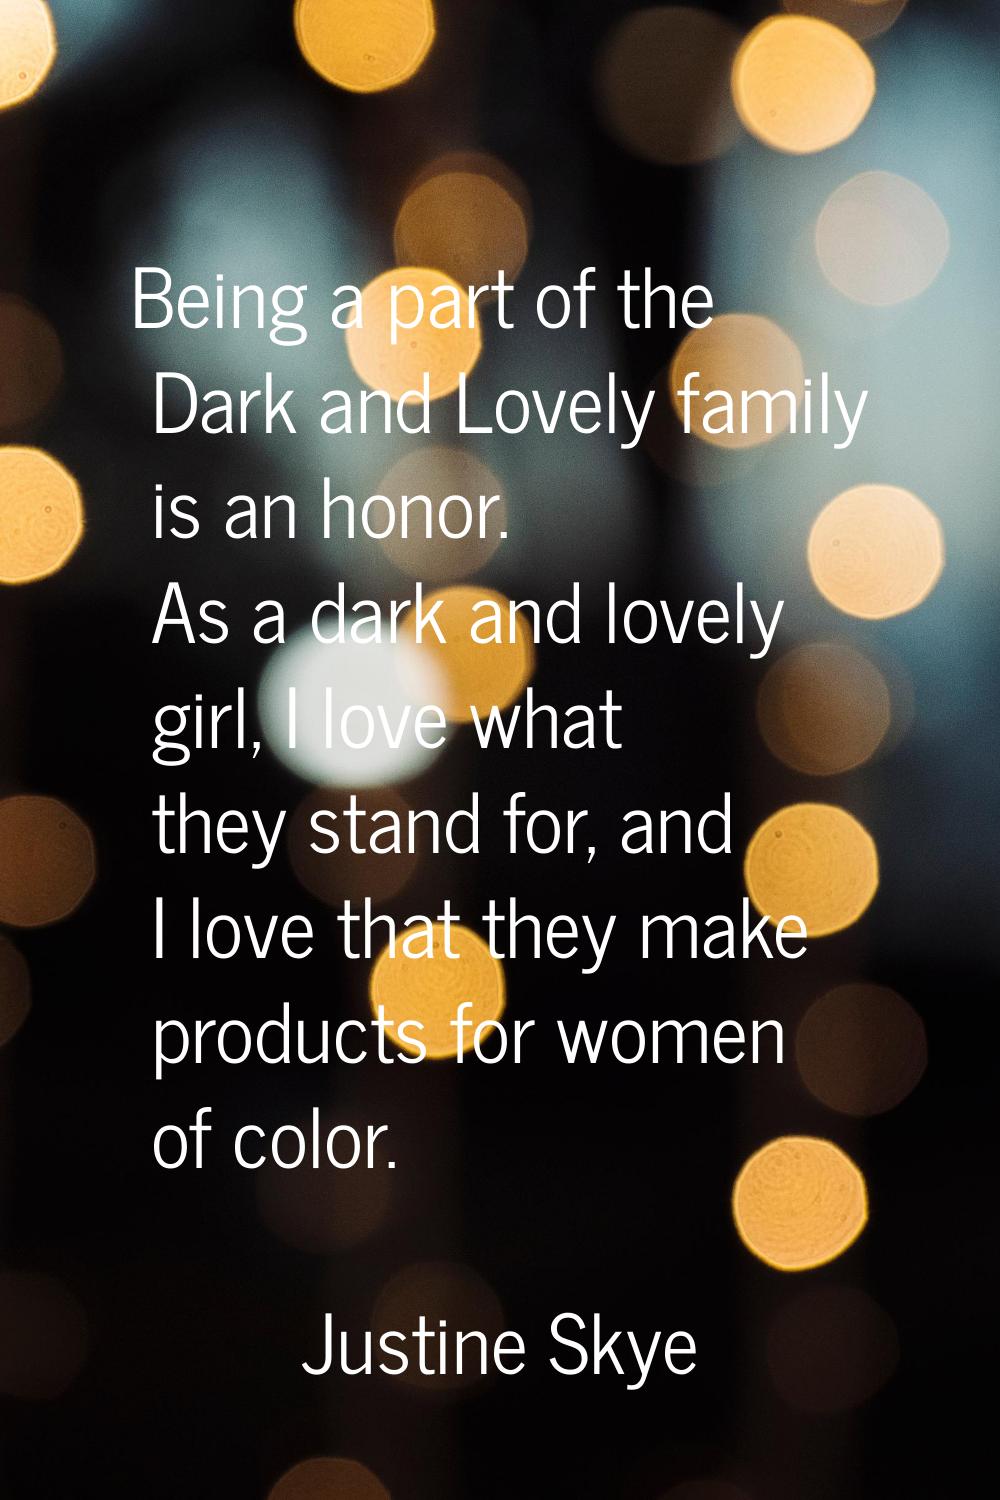 Being a part of the Dark and Lovely family is an honor. As a dark and lovely girl, I love what they